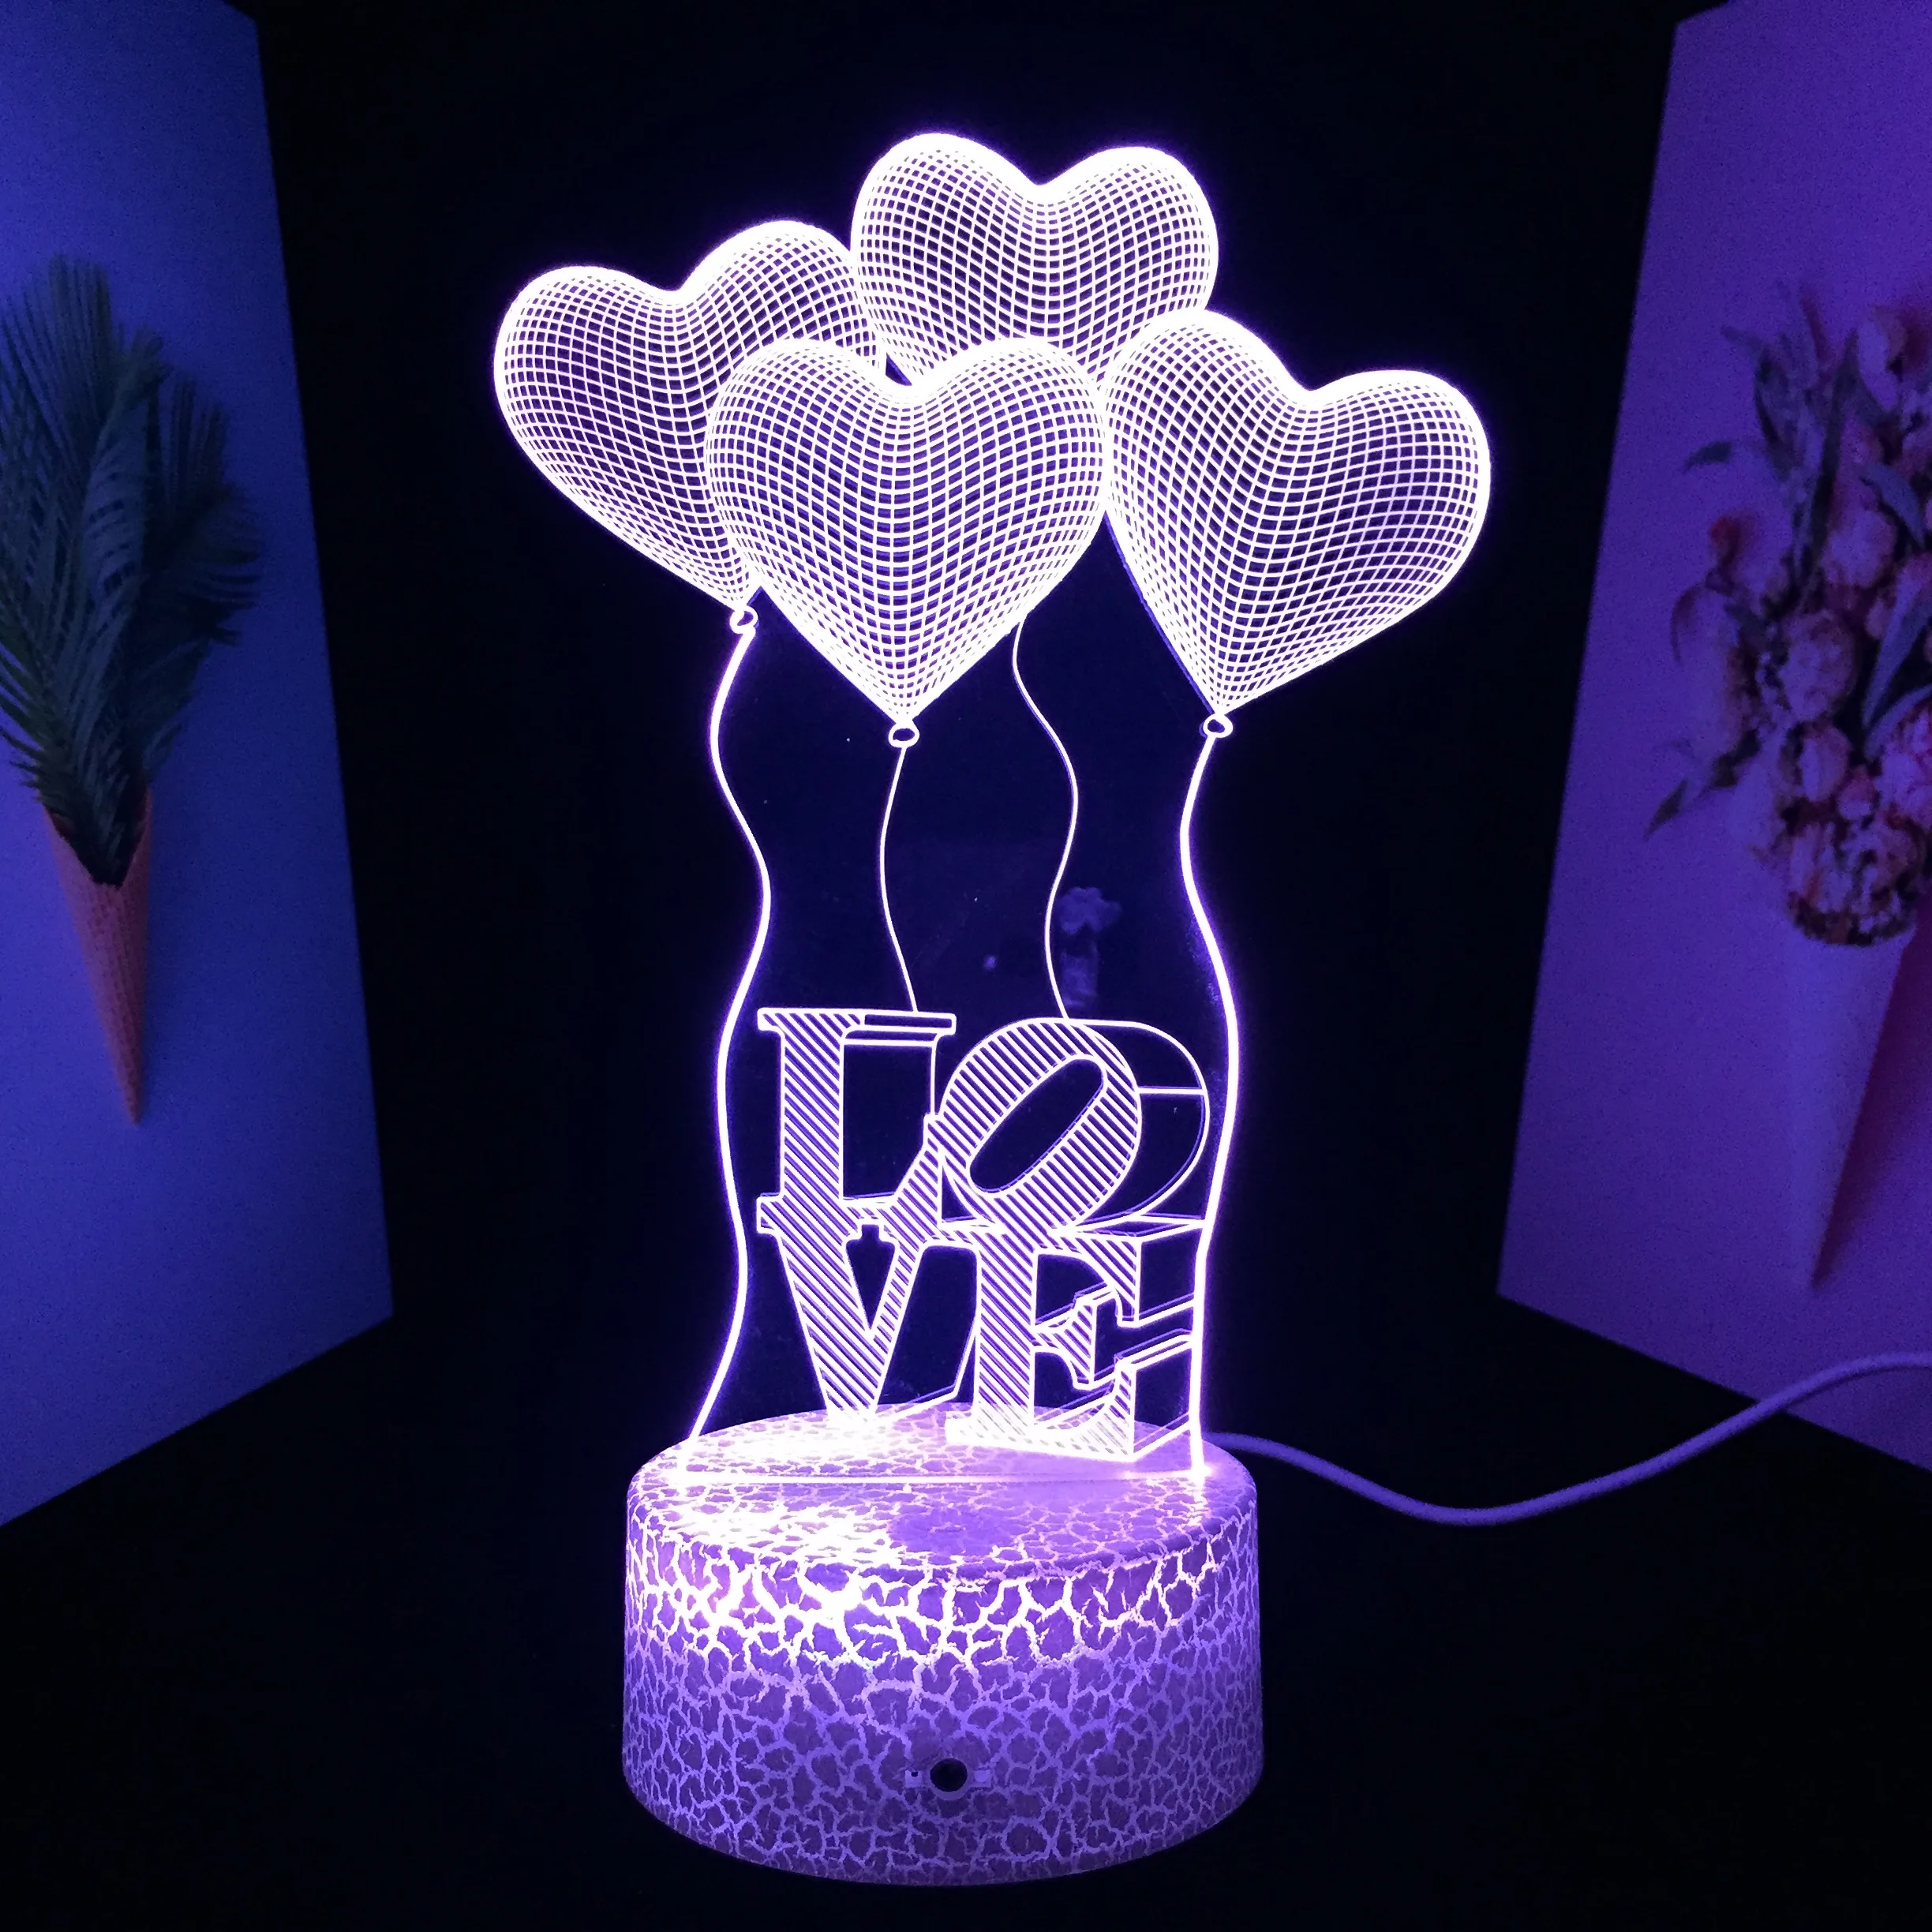 

Valentine's Day Gifts 3D LED Night Light for Wedding Home Room Decor Proposal Atmosphere Light Boy Friend or Girl Remote Gift